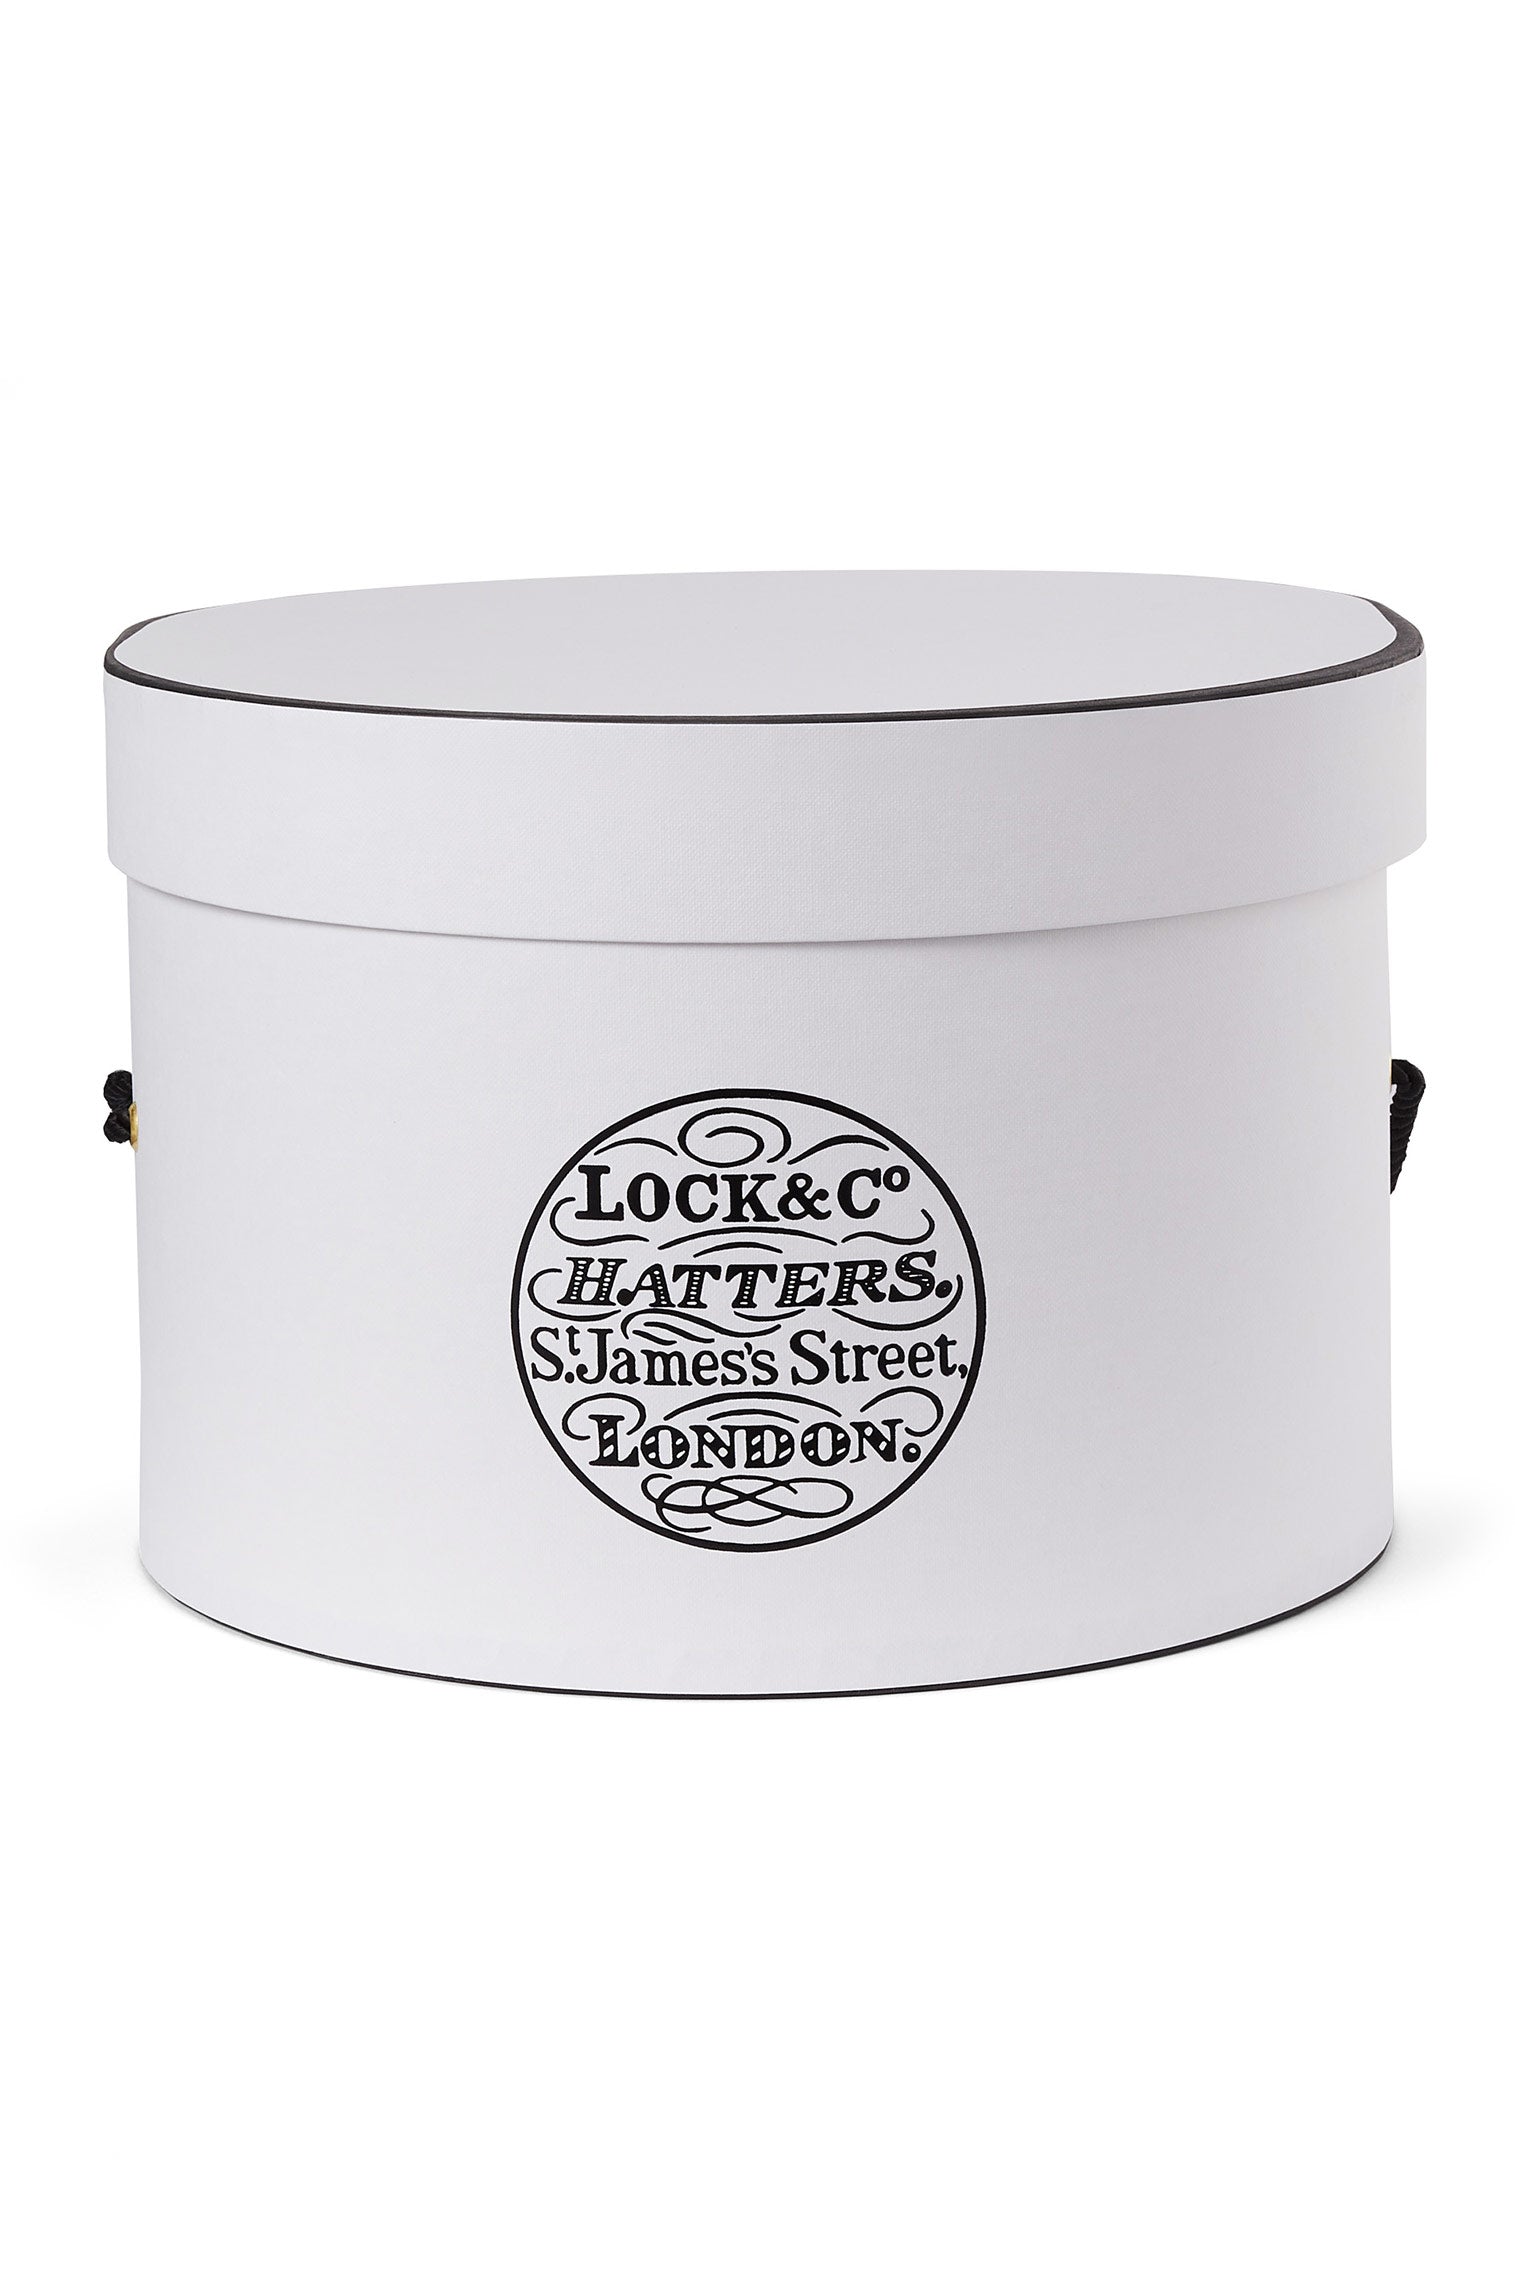 Hat box small - You May Also Like - Lock & Co. Hatters London UK